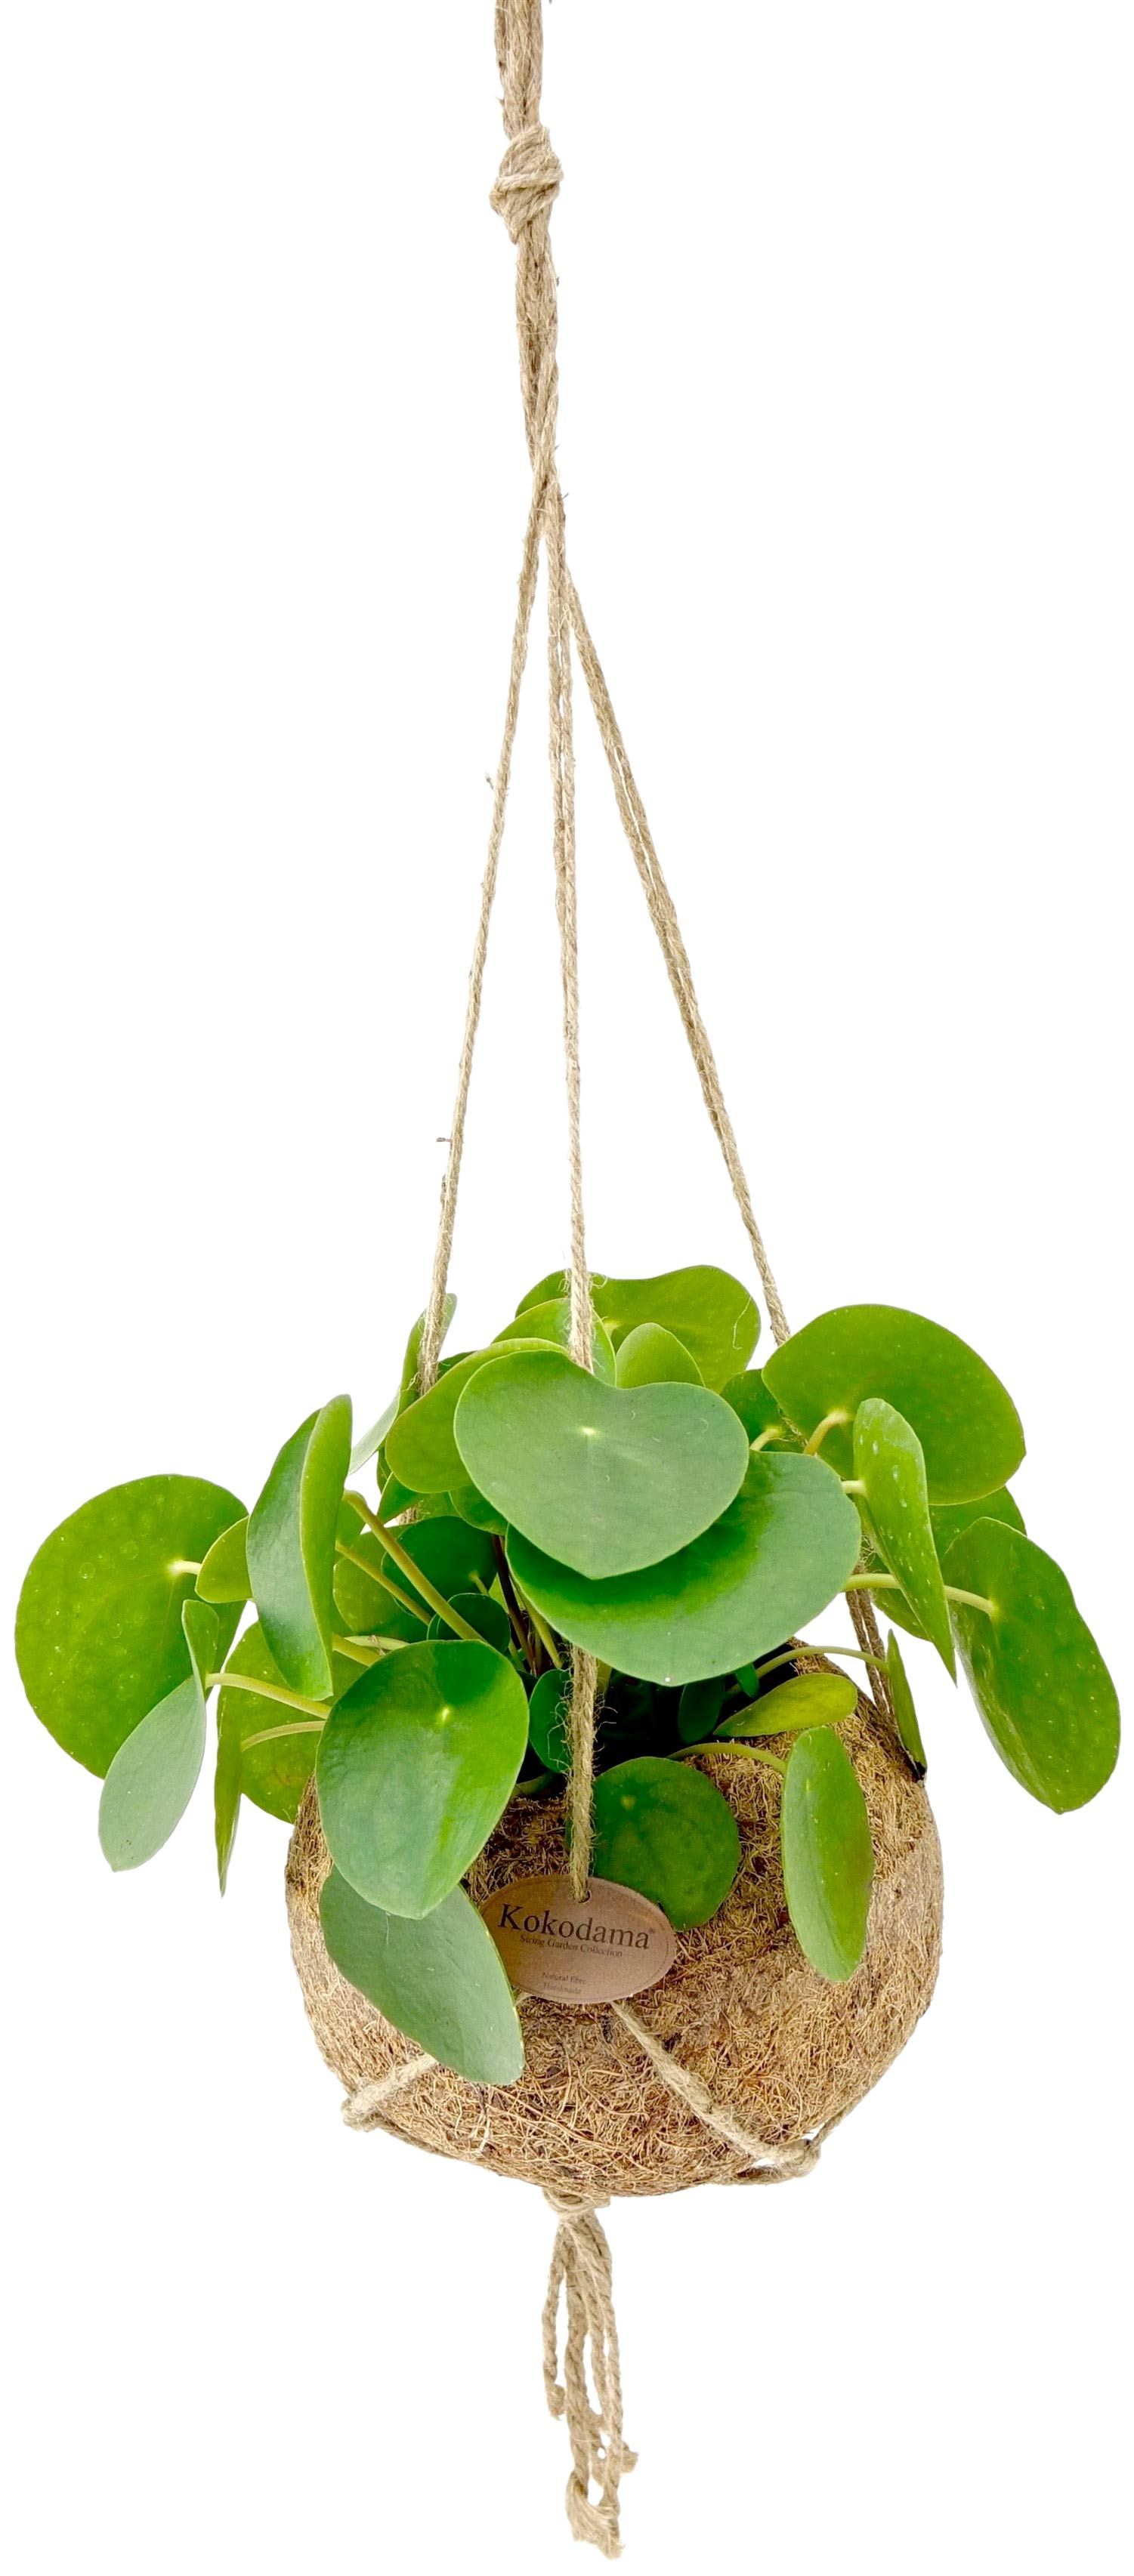 Pilea Peperomioides Unique selling point